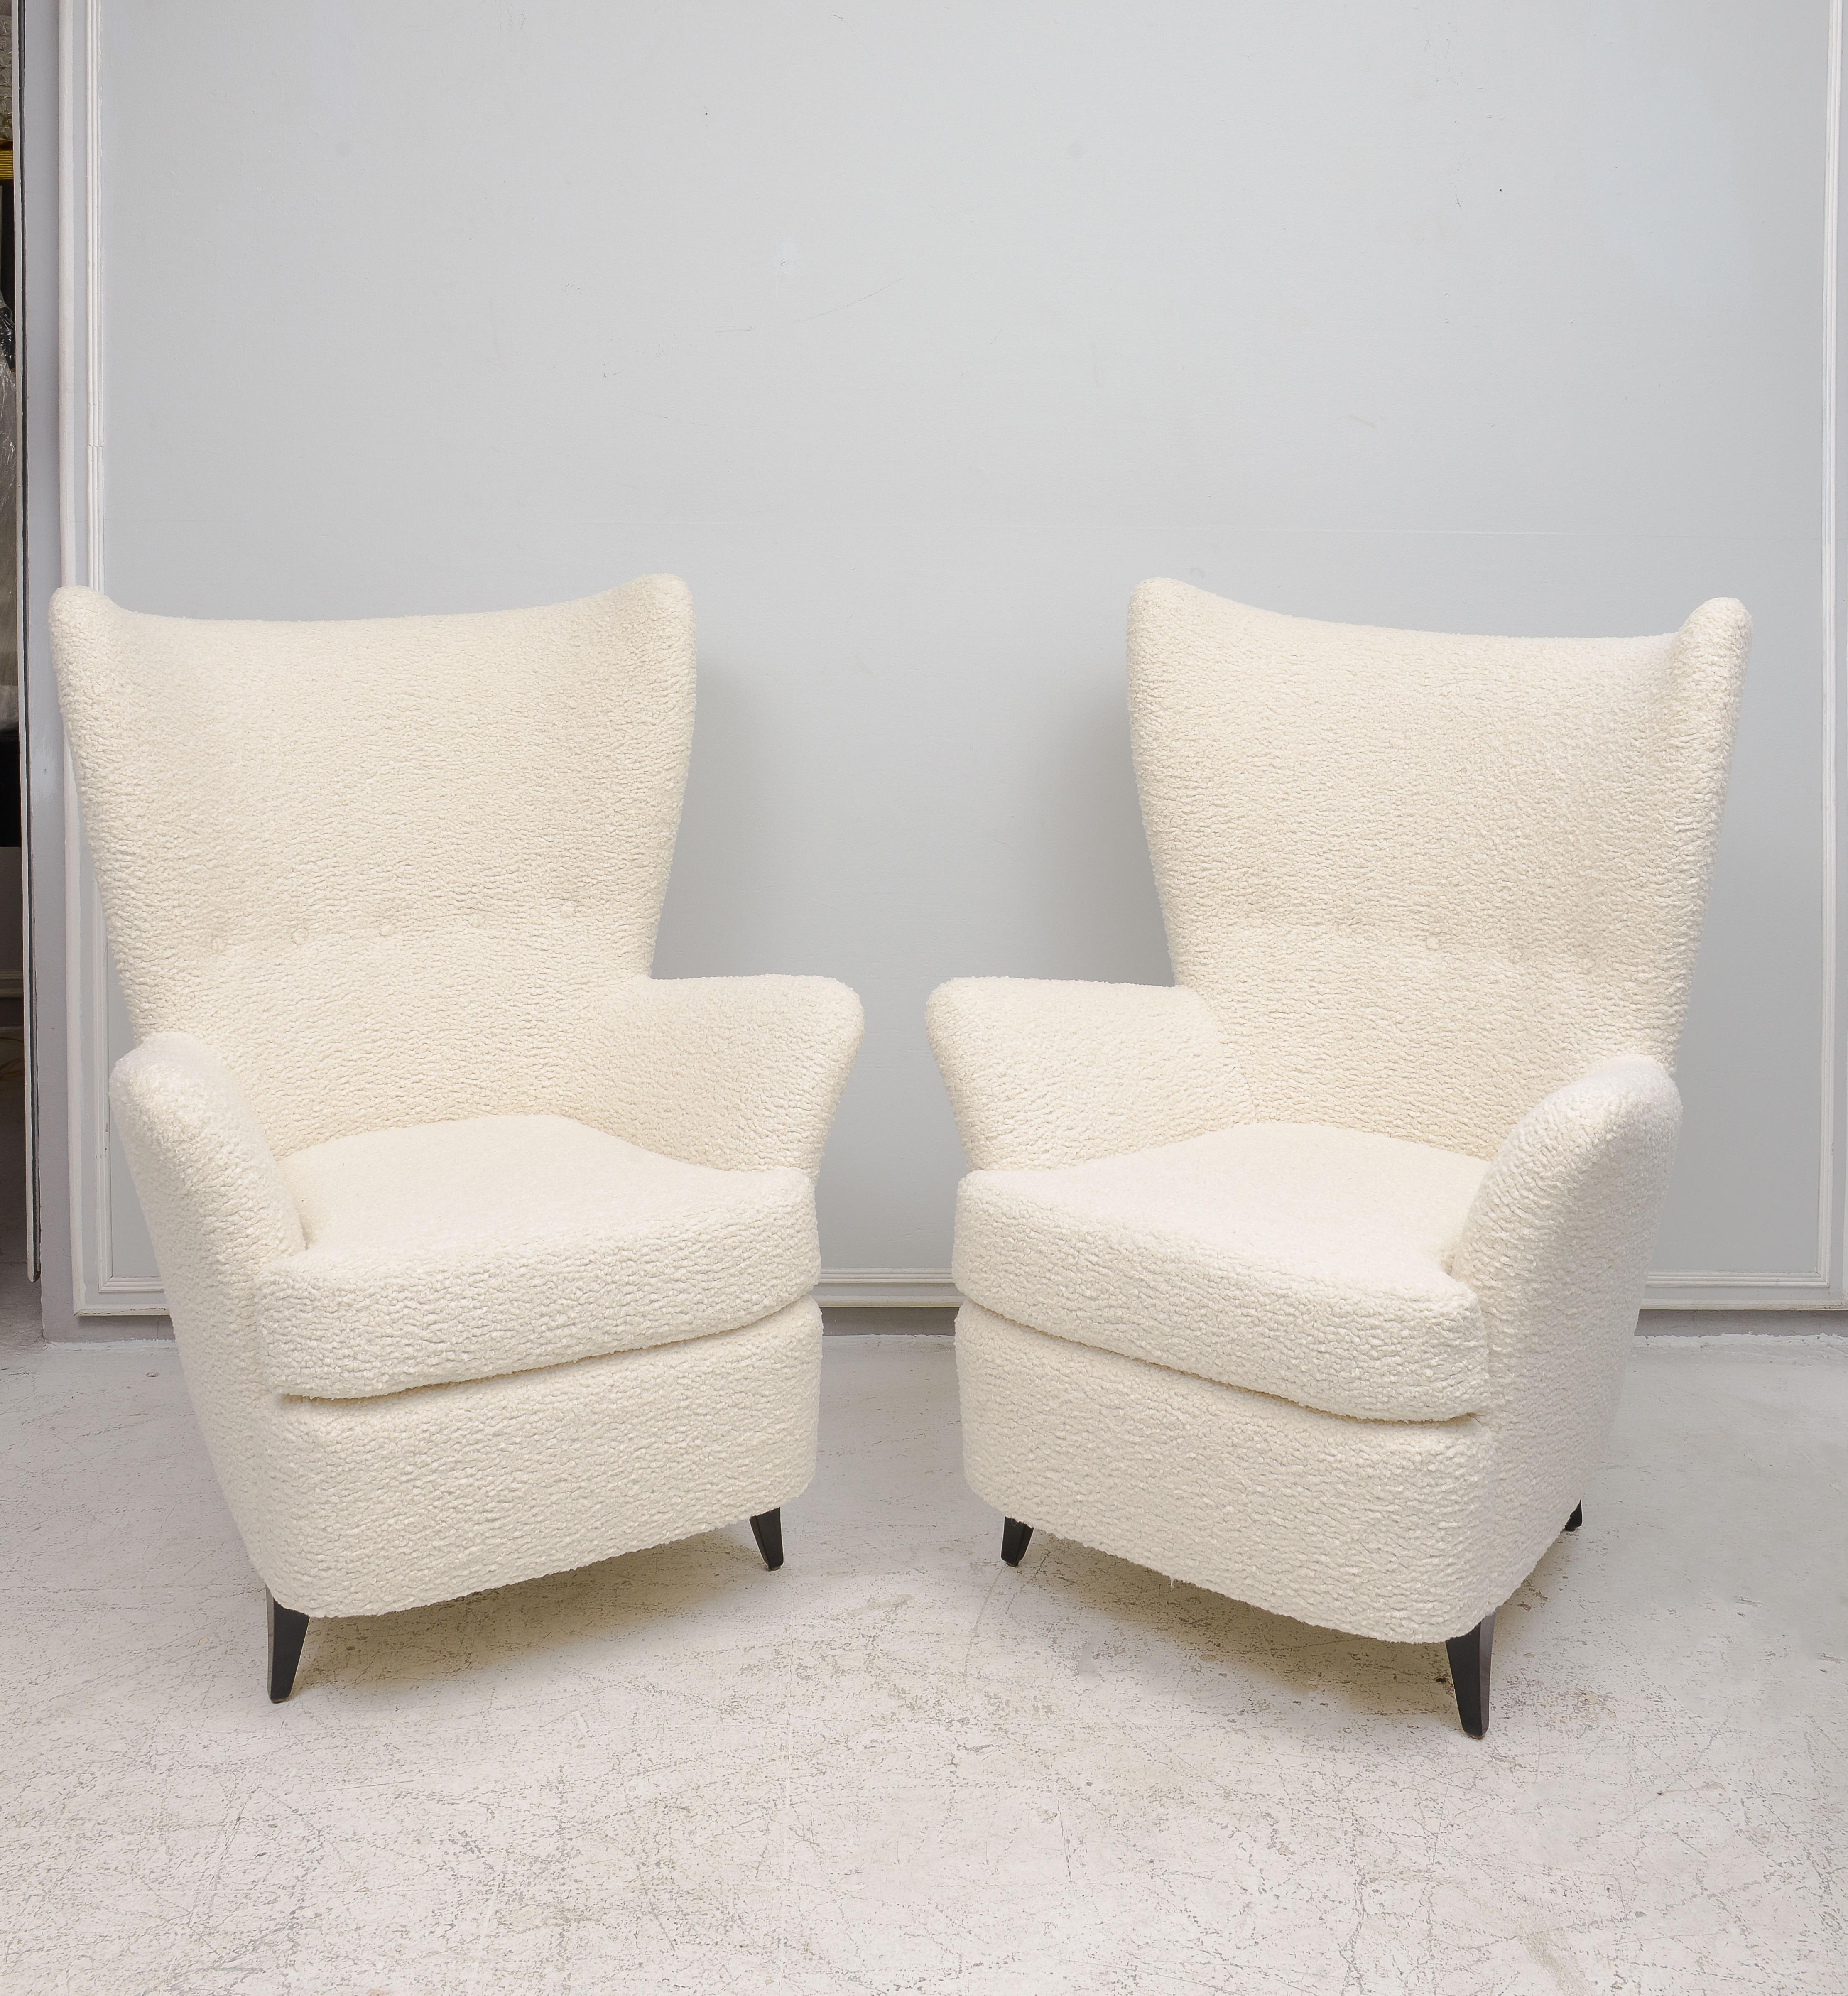 Pair of Italian Mid-Century Modern Lounge Chairs In Excellent Condition For Sale In New York, NY